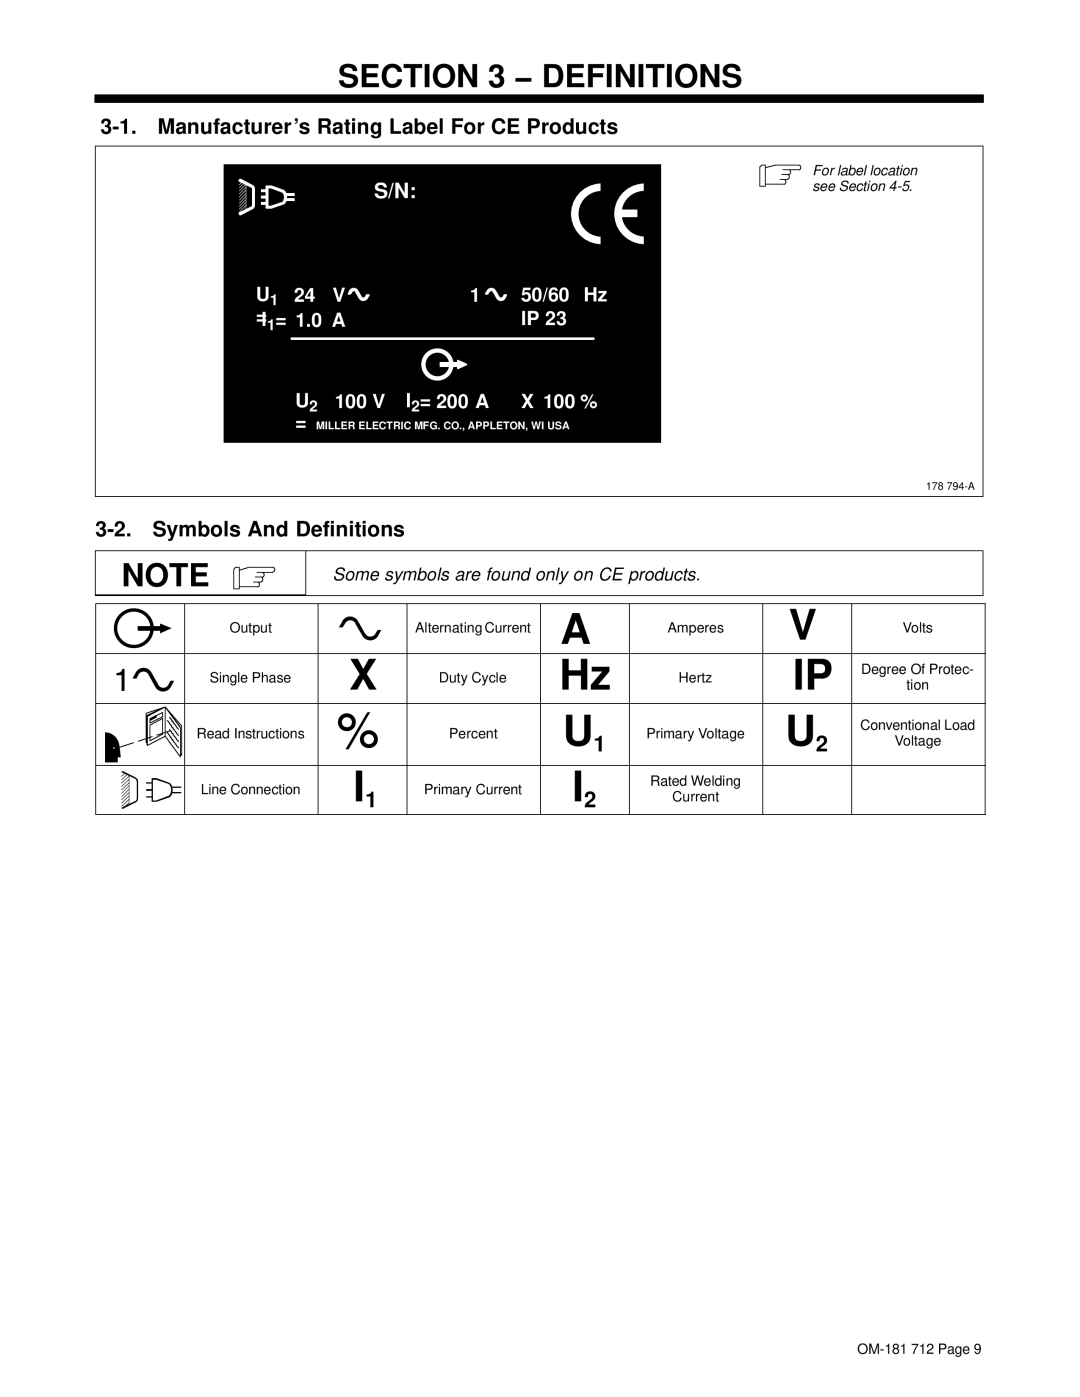 Miller Electric WC-24 manual Manufacturer’s Rating Label For CE Products, Symbols And Definitions 